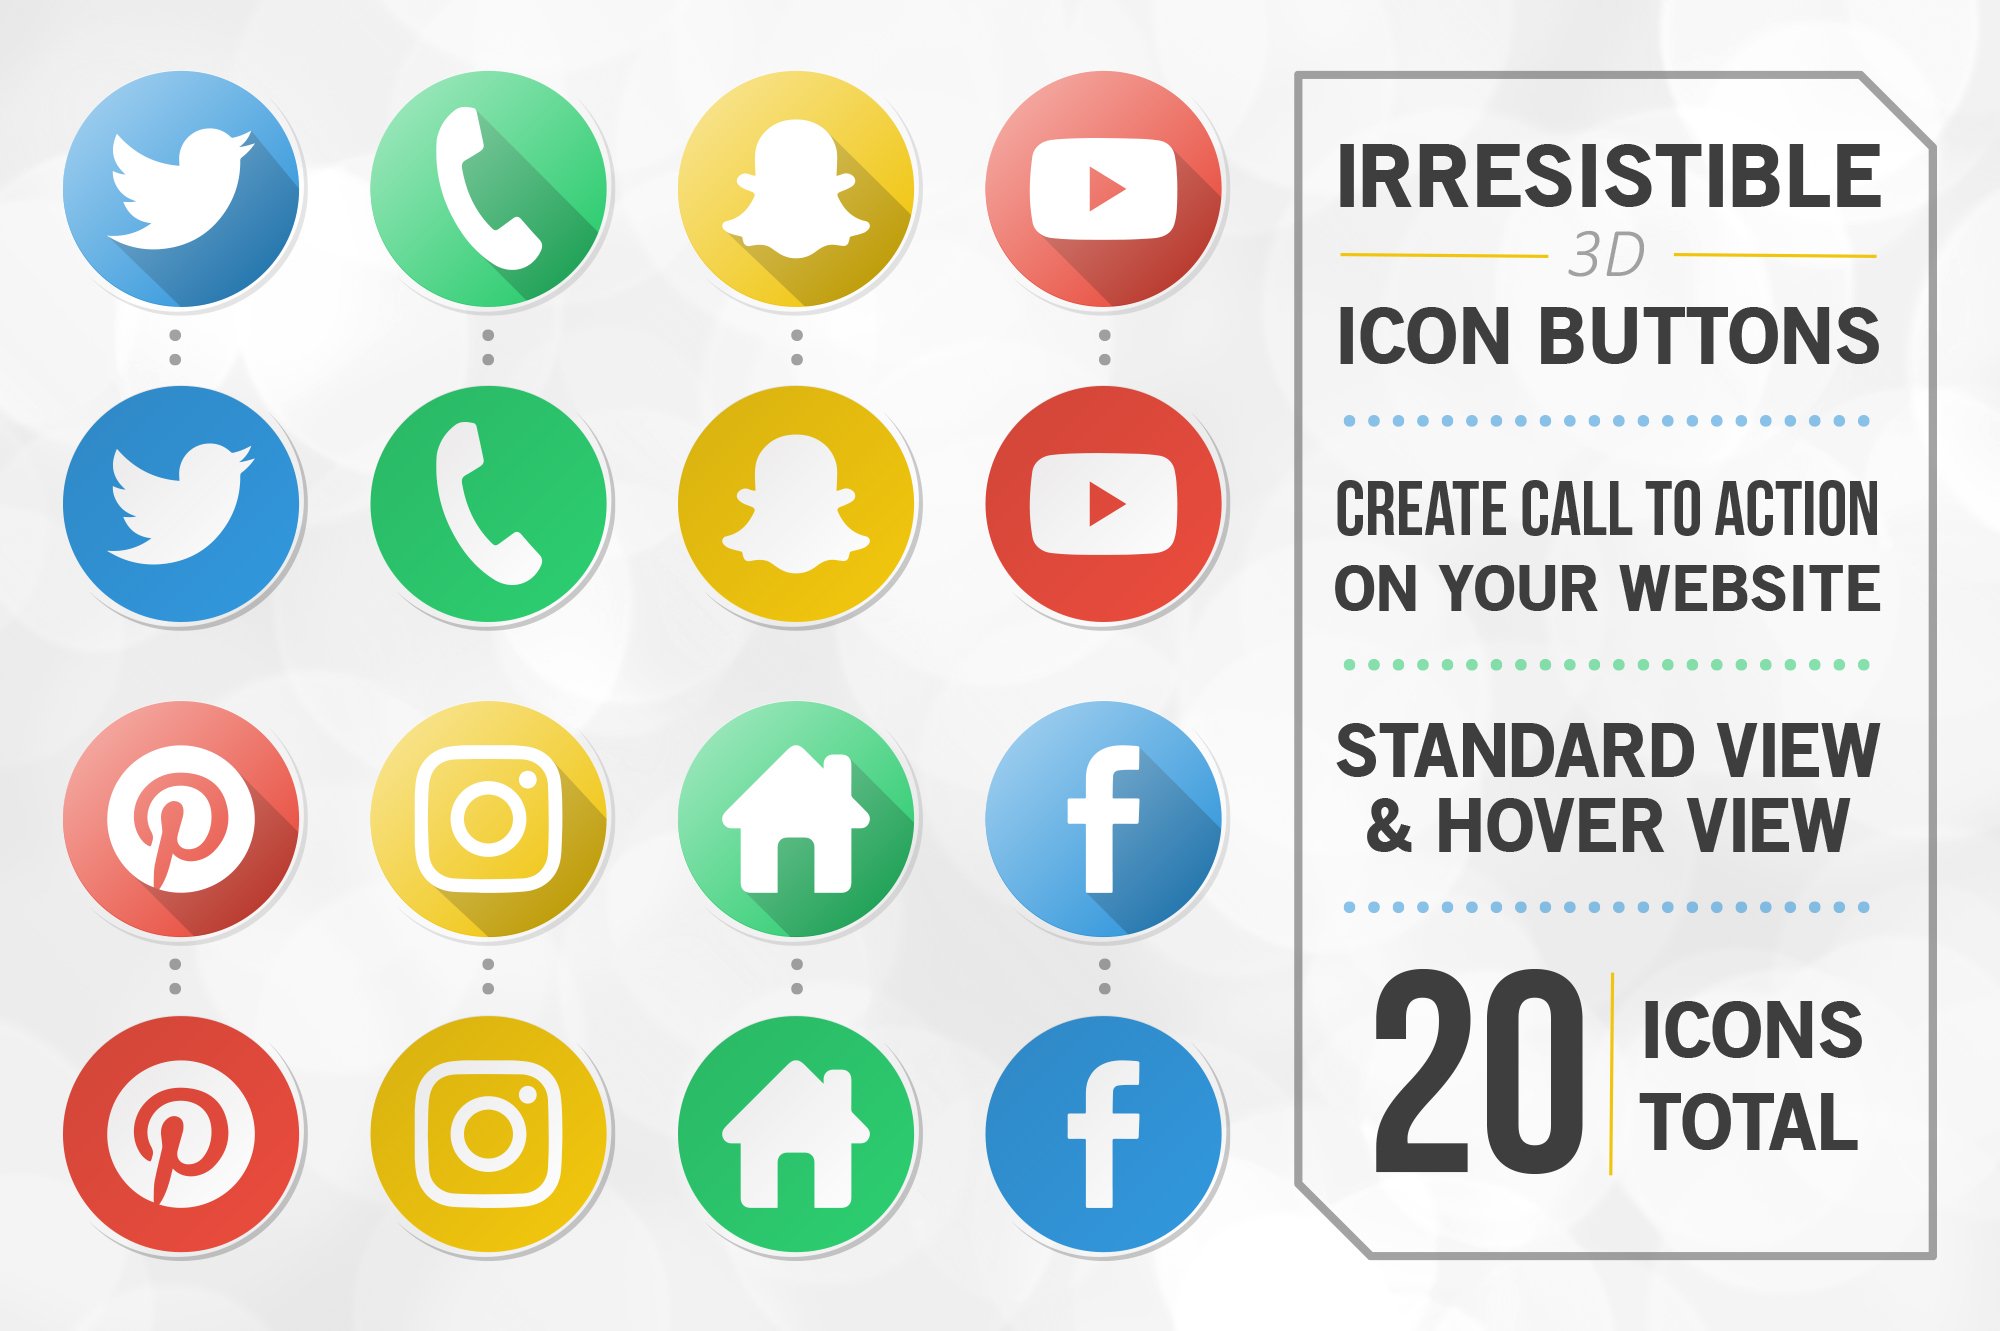 20 Irresistible Icon Buttons cover image.